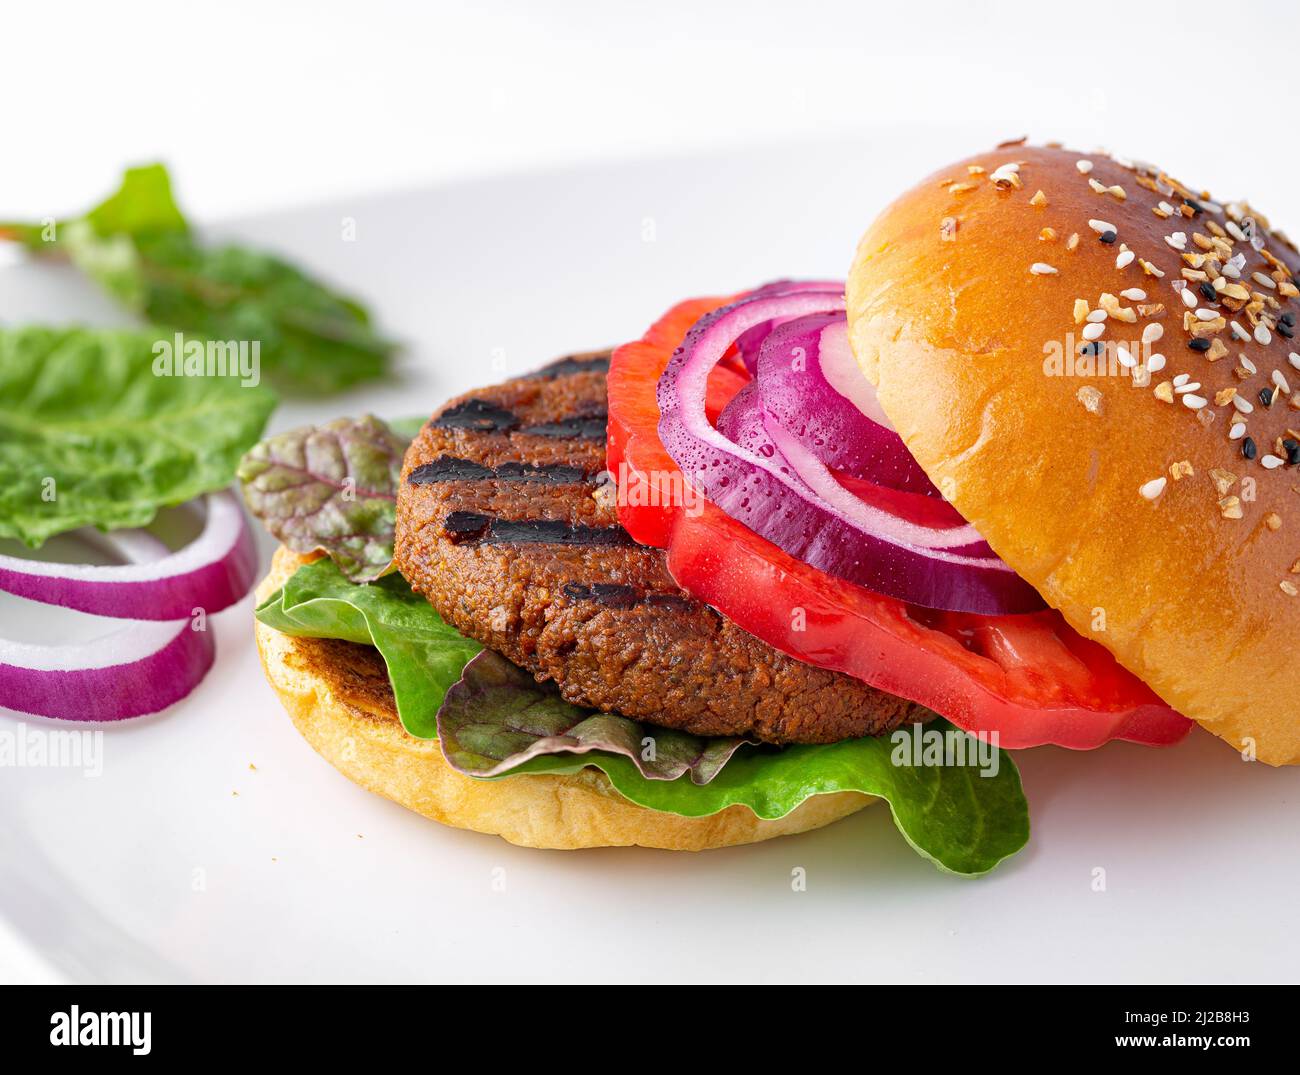 Plant based veggie burger with leafy greens, heirloom tomato, red onion, on a brioche bun topped with sesame seed and dried herb mix Stock Photo